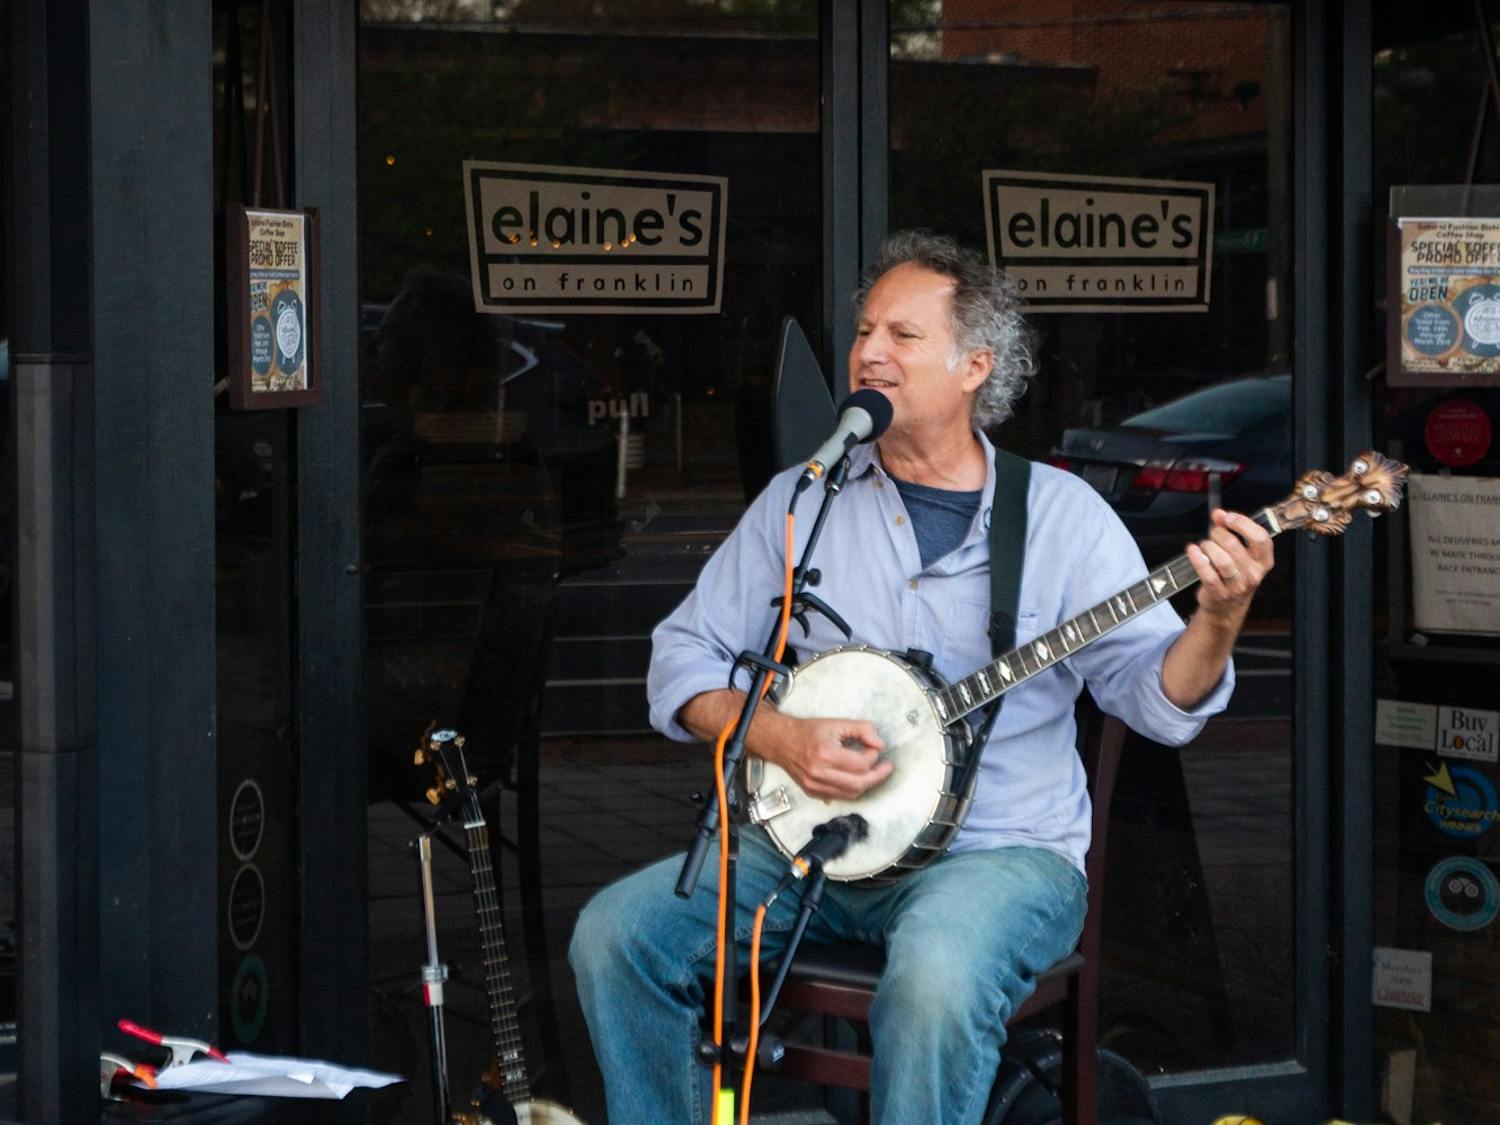 Street performer Cary Moskovitz plays the banjo outside of Elaine's Restaurant on Franklin Street in Chapel Hill, N.C. on Saturday, April 1, 2023. The performance was part of the Downtown Live series, which features local musicians in outdoor settings in downtown Chapel Hill.